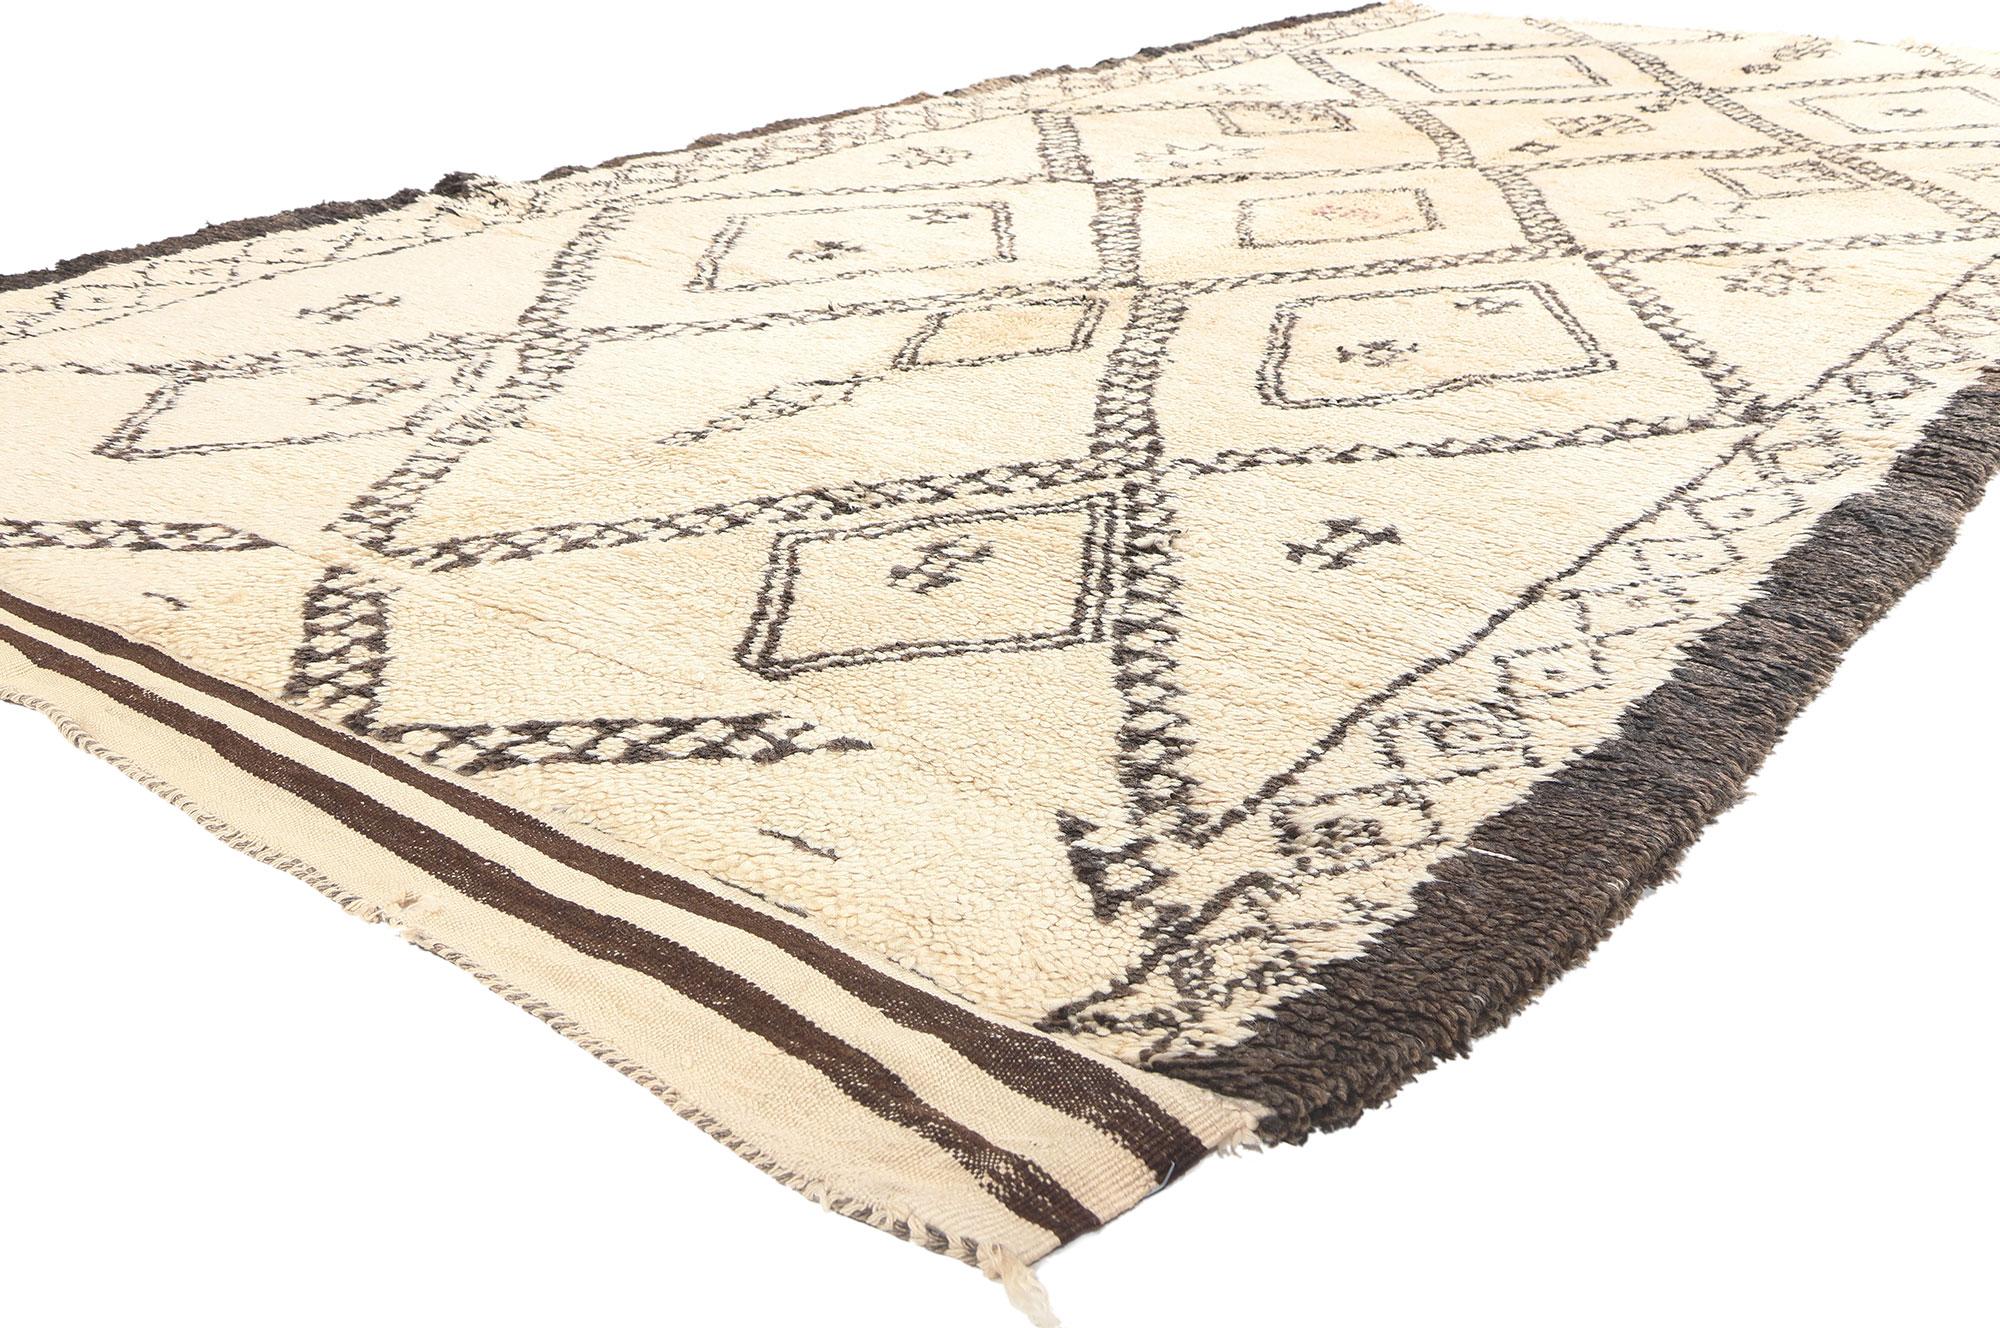 74733 Vintage Moroccan Beni Ourain Rug, 06'02 x 13'04. 
Immerse yourself in the artful legacy of Beni Ourain rugs, meticulously hand-woven by skilled women from the Beni Ourain and diverse Berber tribes nestled in the North-Eastern Middle Atlas